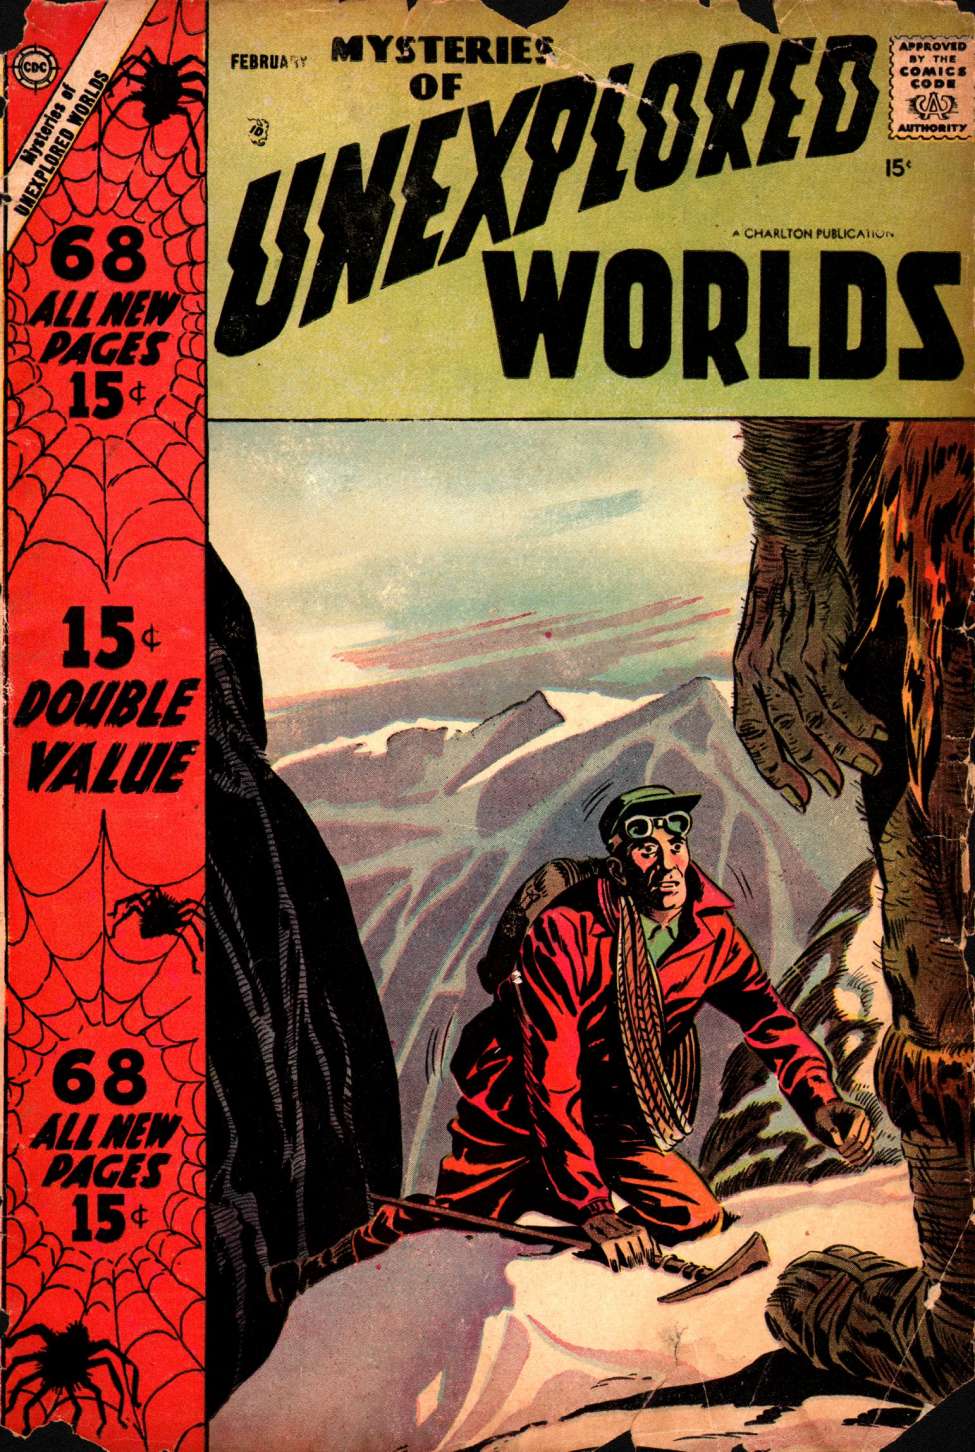 Comic Book Cover For Mysteries of Unexplored Worlds 7